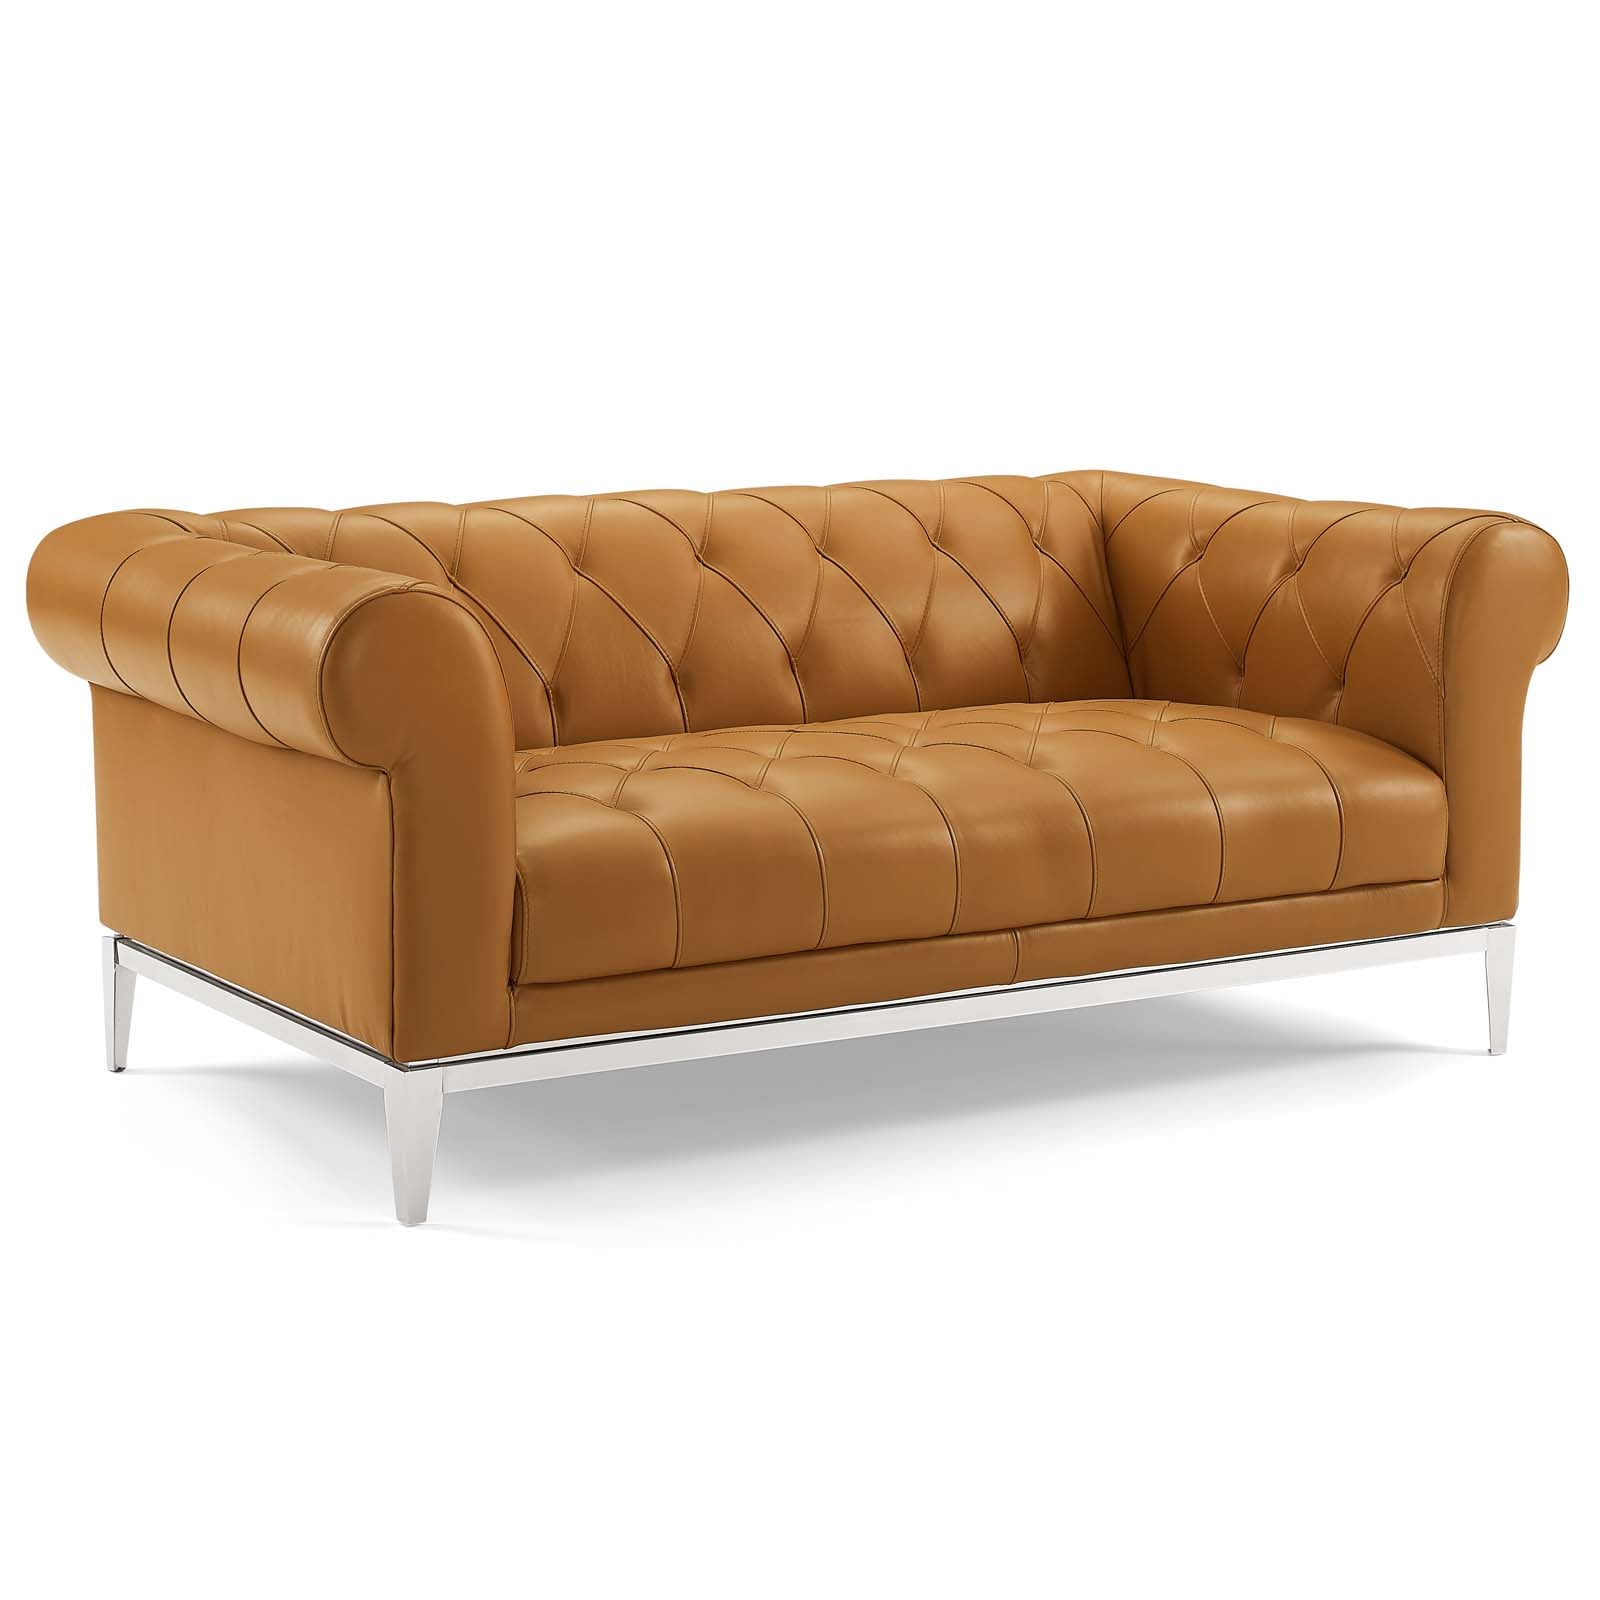 Modway Loveseats - Idyll Tufted Button Upholstered Leather Chesterfield Loveseat Tan